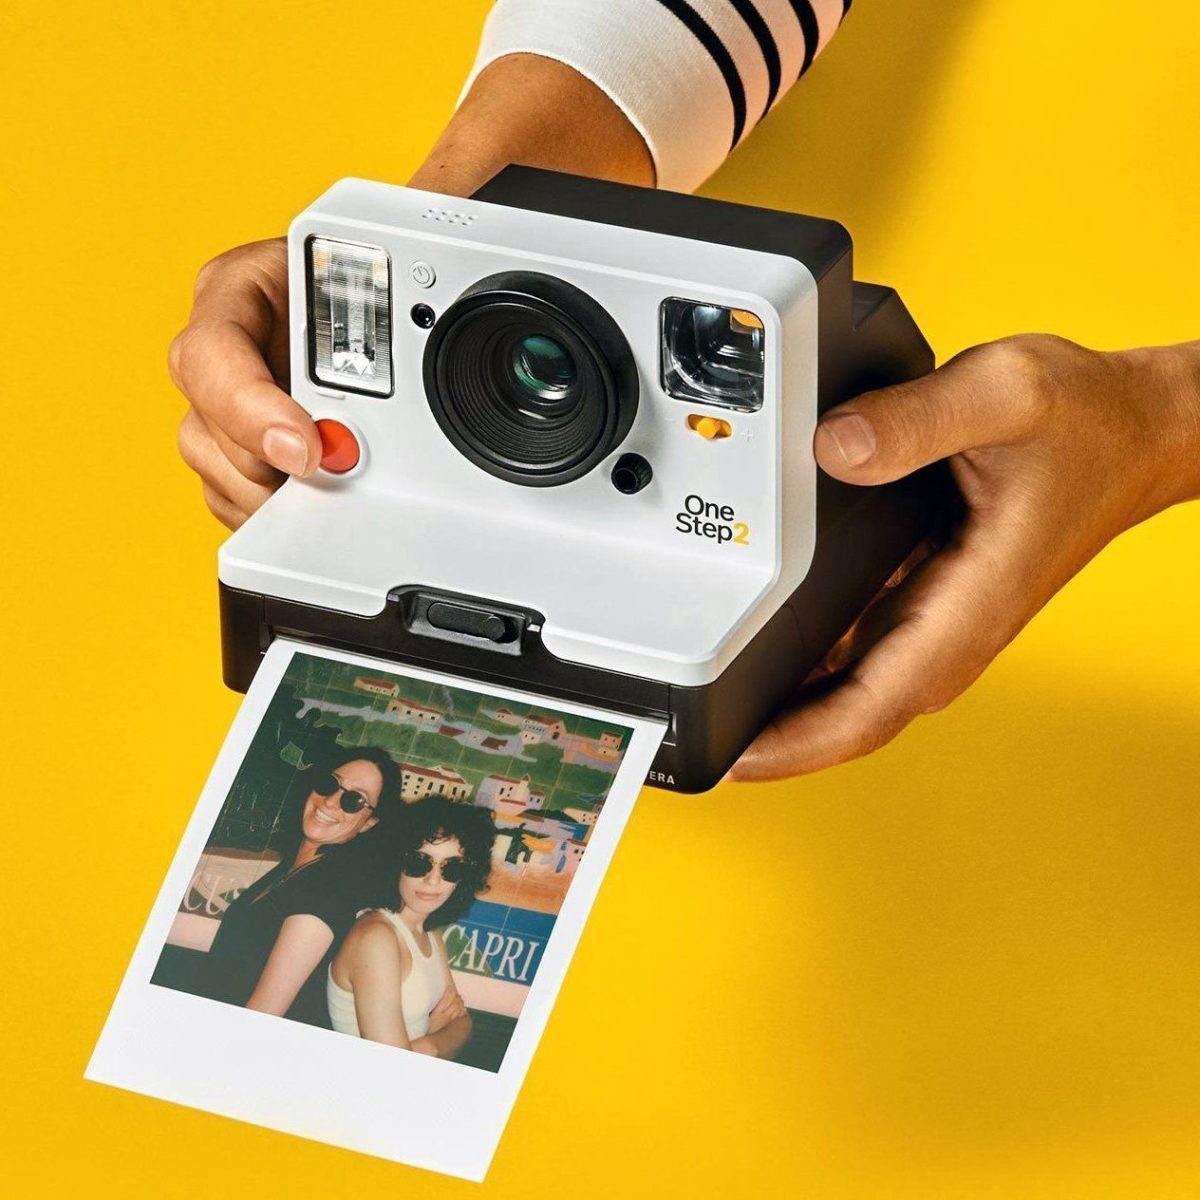 00B88Ab570275Fe46982C34D1840F657 Polaroid &Lt;Ul&Gt; &Lt;Li&Gt;Original Polaroid Format - Easy To Use - 60-Day Battery Life - Powerful Flash - Self-Timer Mode&Lt;/Li&Gt; &Lt;Li&Gt;Bluetooth-Connected App: Full Manual Control - Double Exposure - Light Painting - Noise Trigger - And More!&Lt;/Li&Gt; &Lt;Li&Gt;Standard &Amp; Portrait Lenses: You Can Switch Between Two Different Lenses. One For Portraits So You Can Take A Photo From 1Ft To 3Ft. The Second Is The Standard Lens: Photos From 3Ft To Infinity.&Lt;/Li&Gt; &Lt;Li&Gt;Available For Ios And Android&Lt;/Li&Gt; &Lt;Li&Gt;Compatible With I-Type And 600 Films.tripod Mounting Thread:1/4 Inch-20 Female&Lt;/Li&Gt; &Lt;/Ul&Gt; Polaroid Polaroid Originals Onestep+ - White